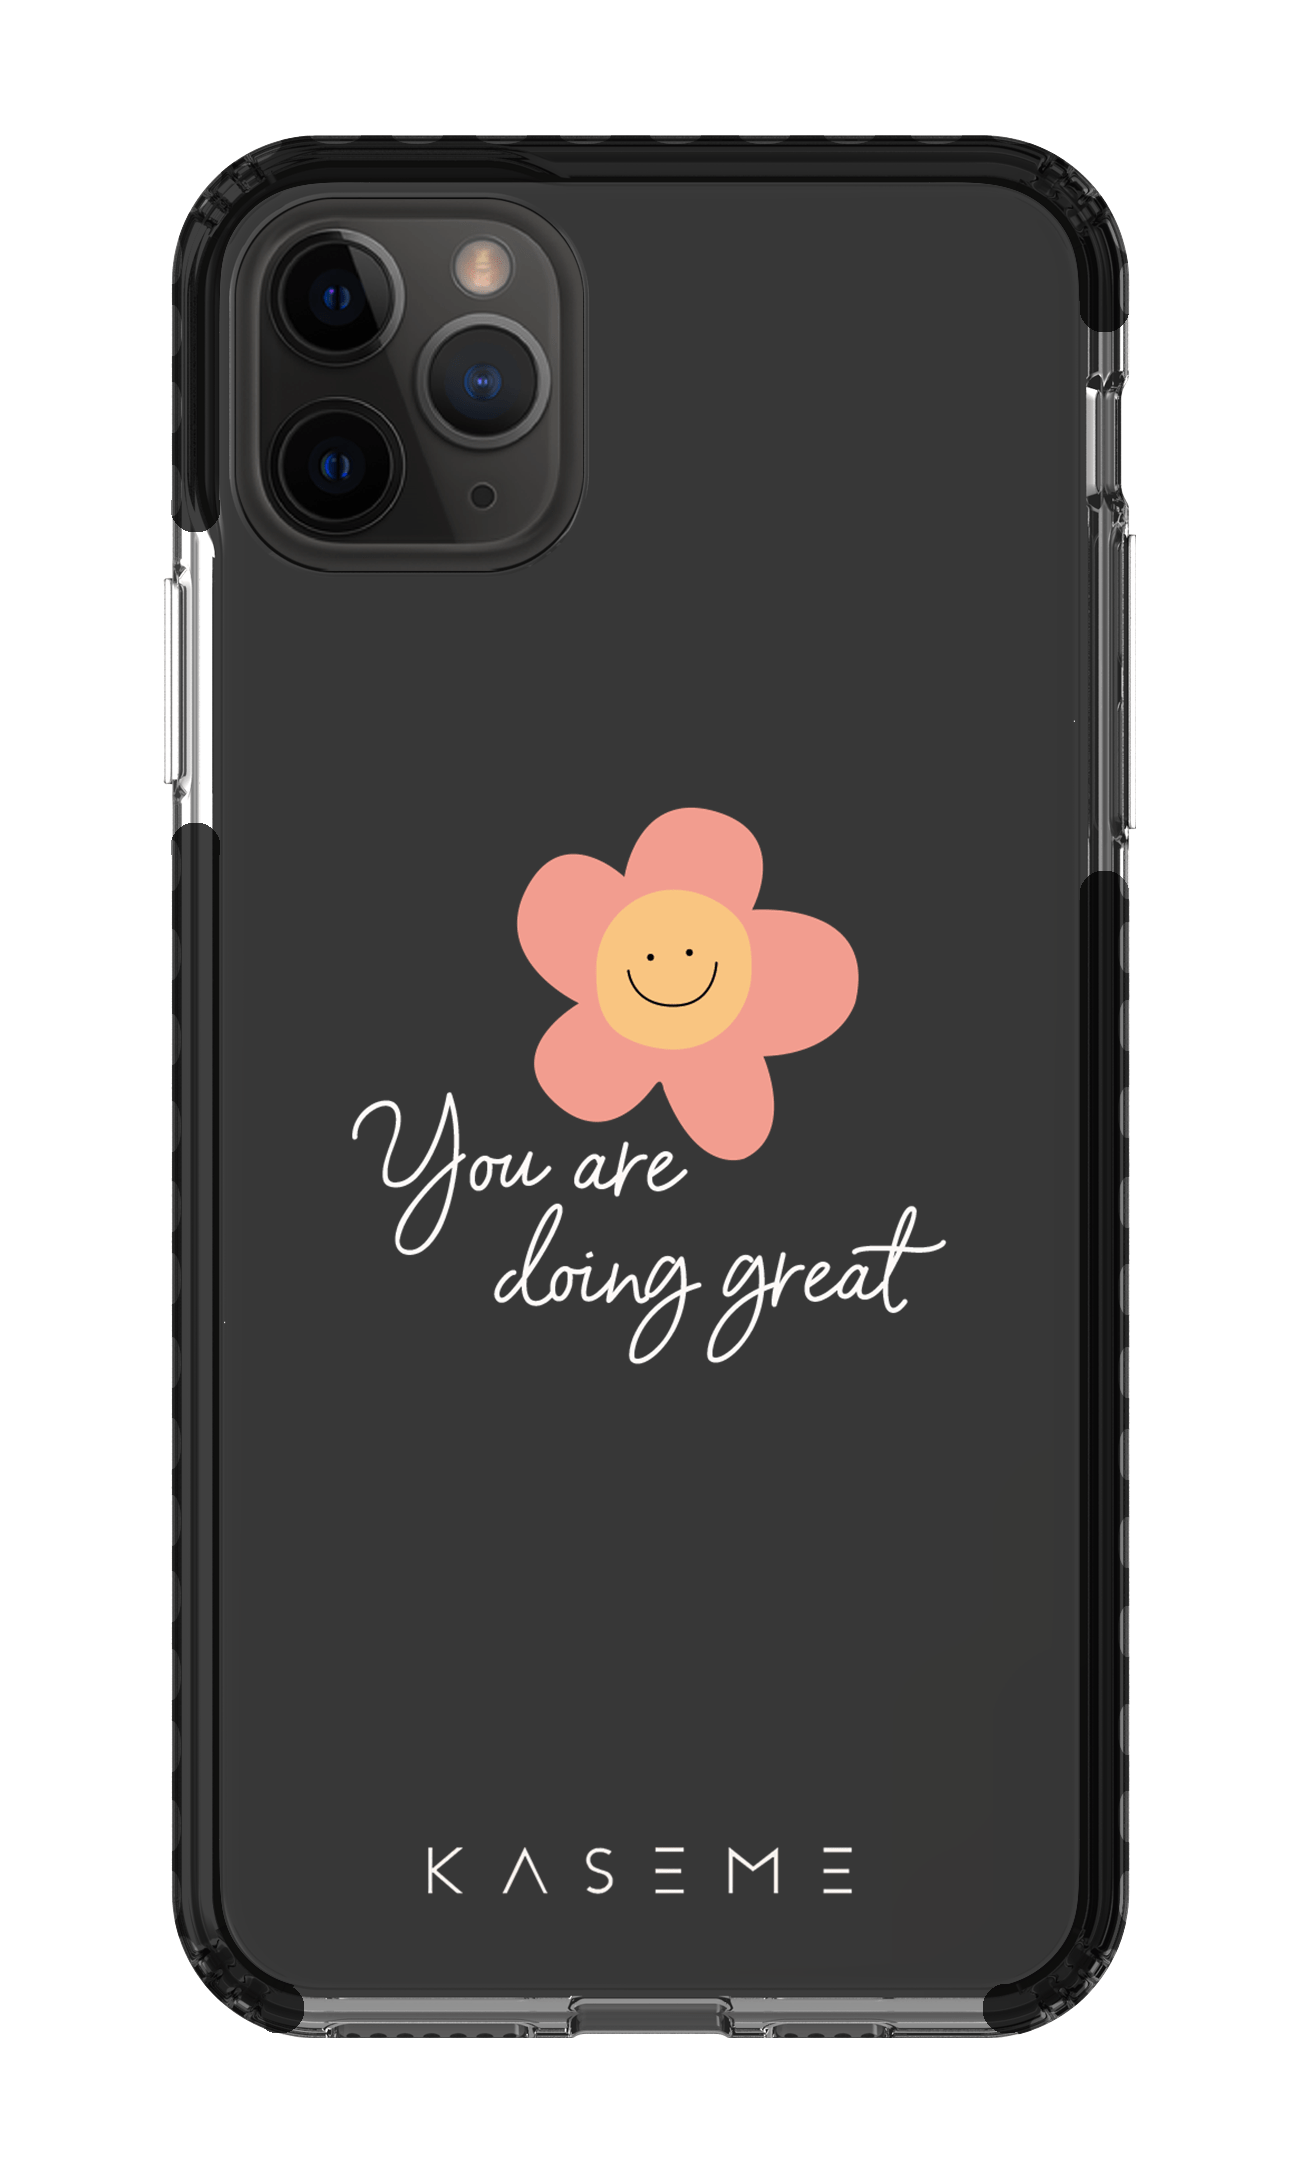 Sweetheart Clear Case - iPhone 11 Pro Max